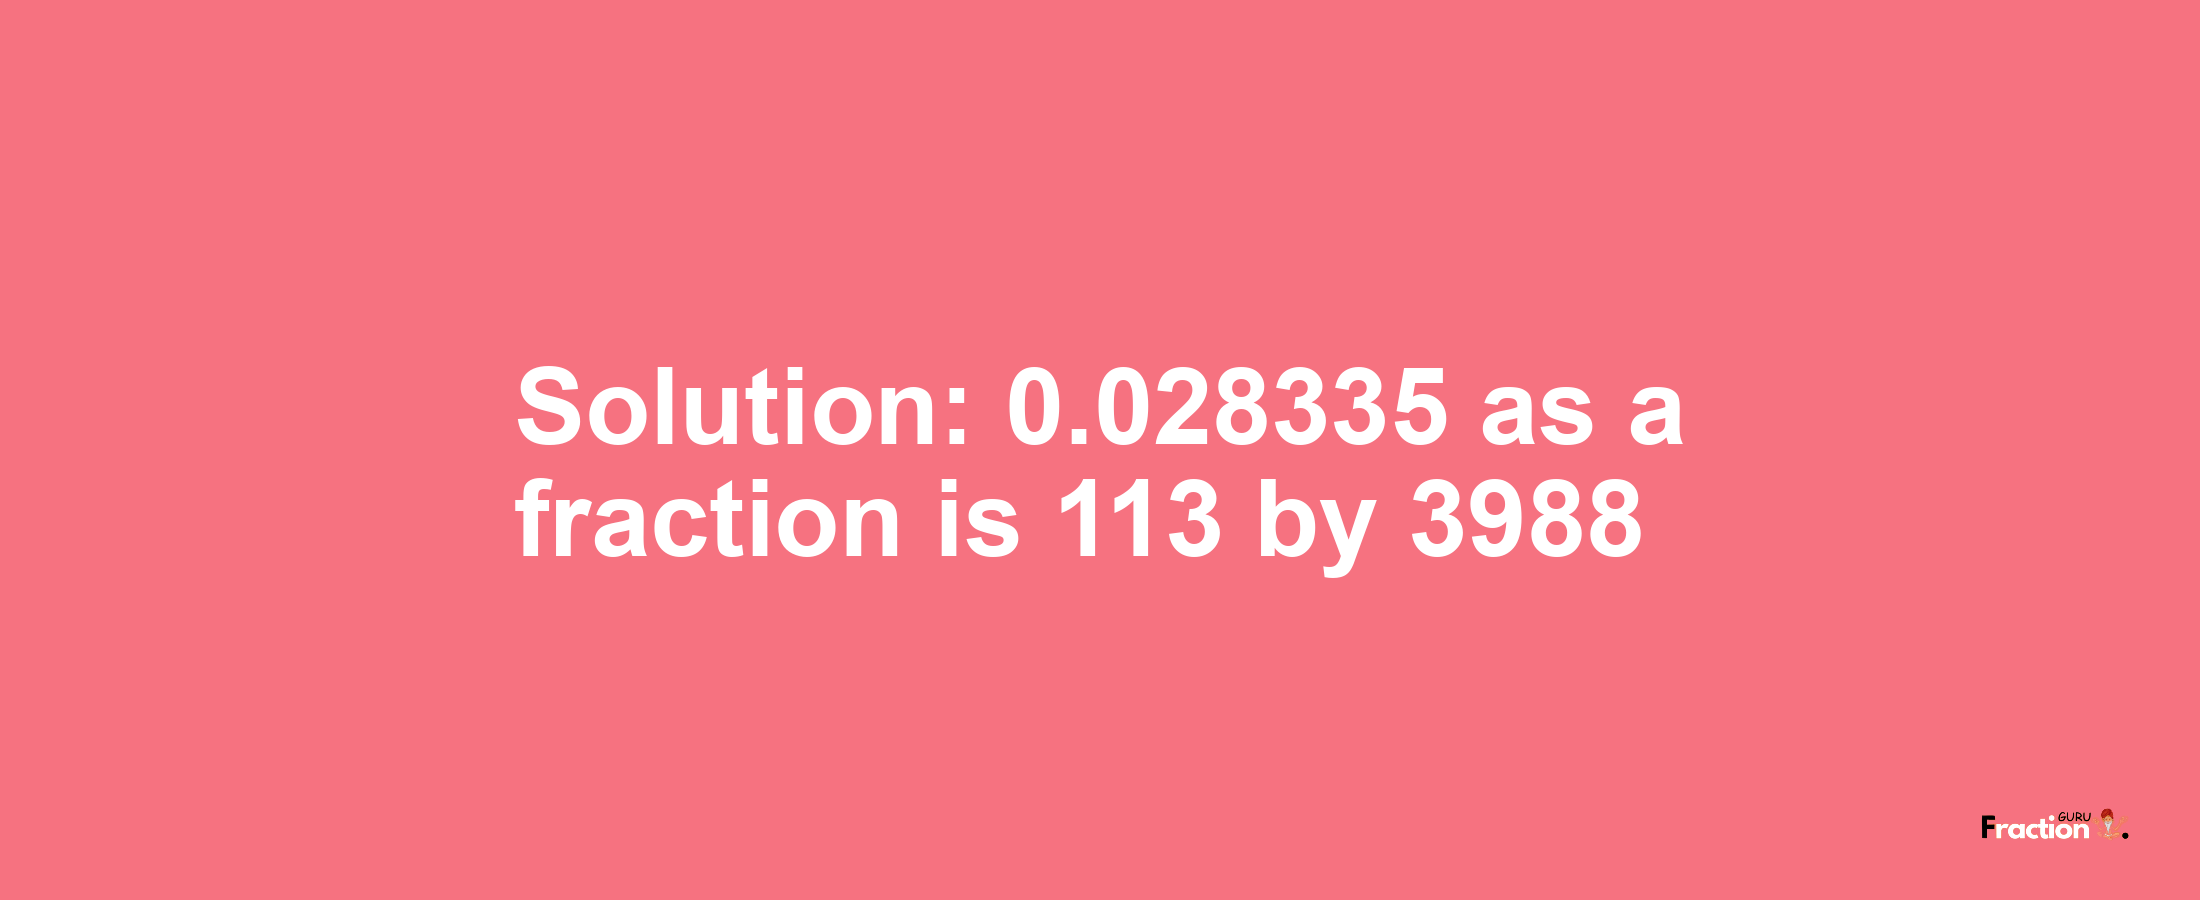 Solution:0.028335 as a fraction is 113/3988